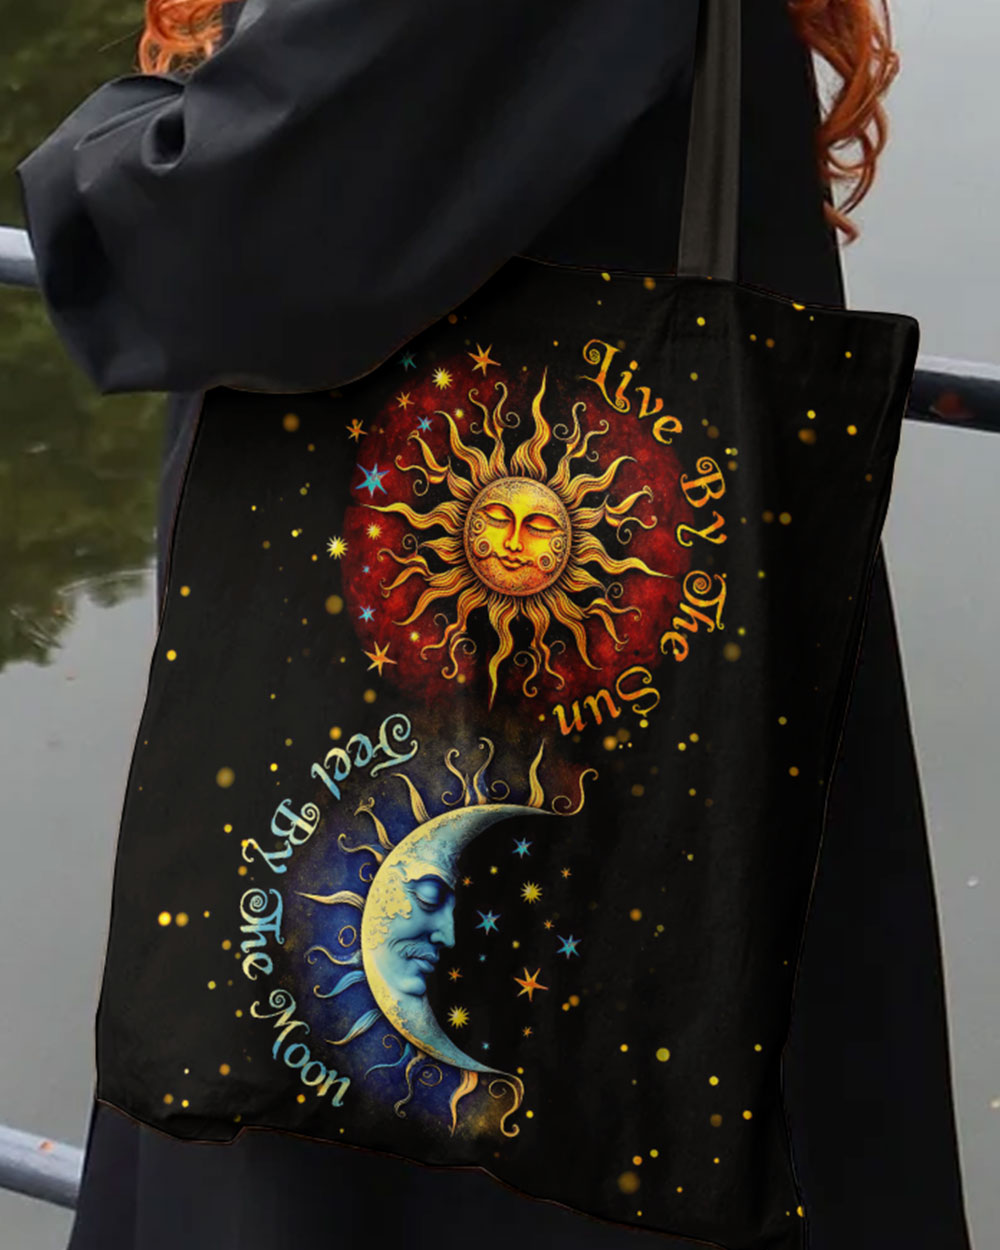 LIVE BY THE SUN TOTE BAG - TYTM2203237